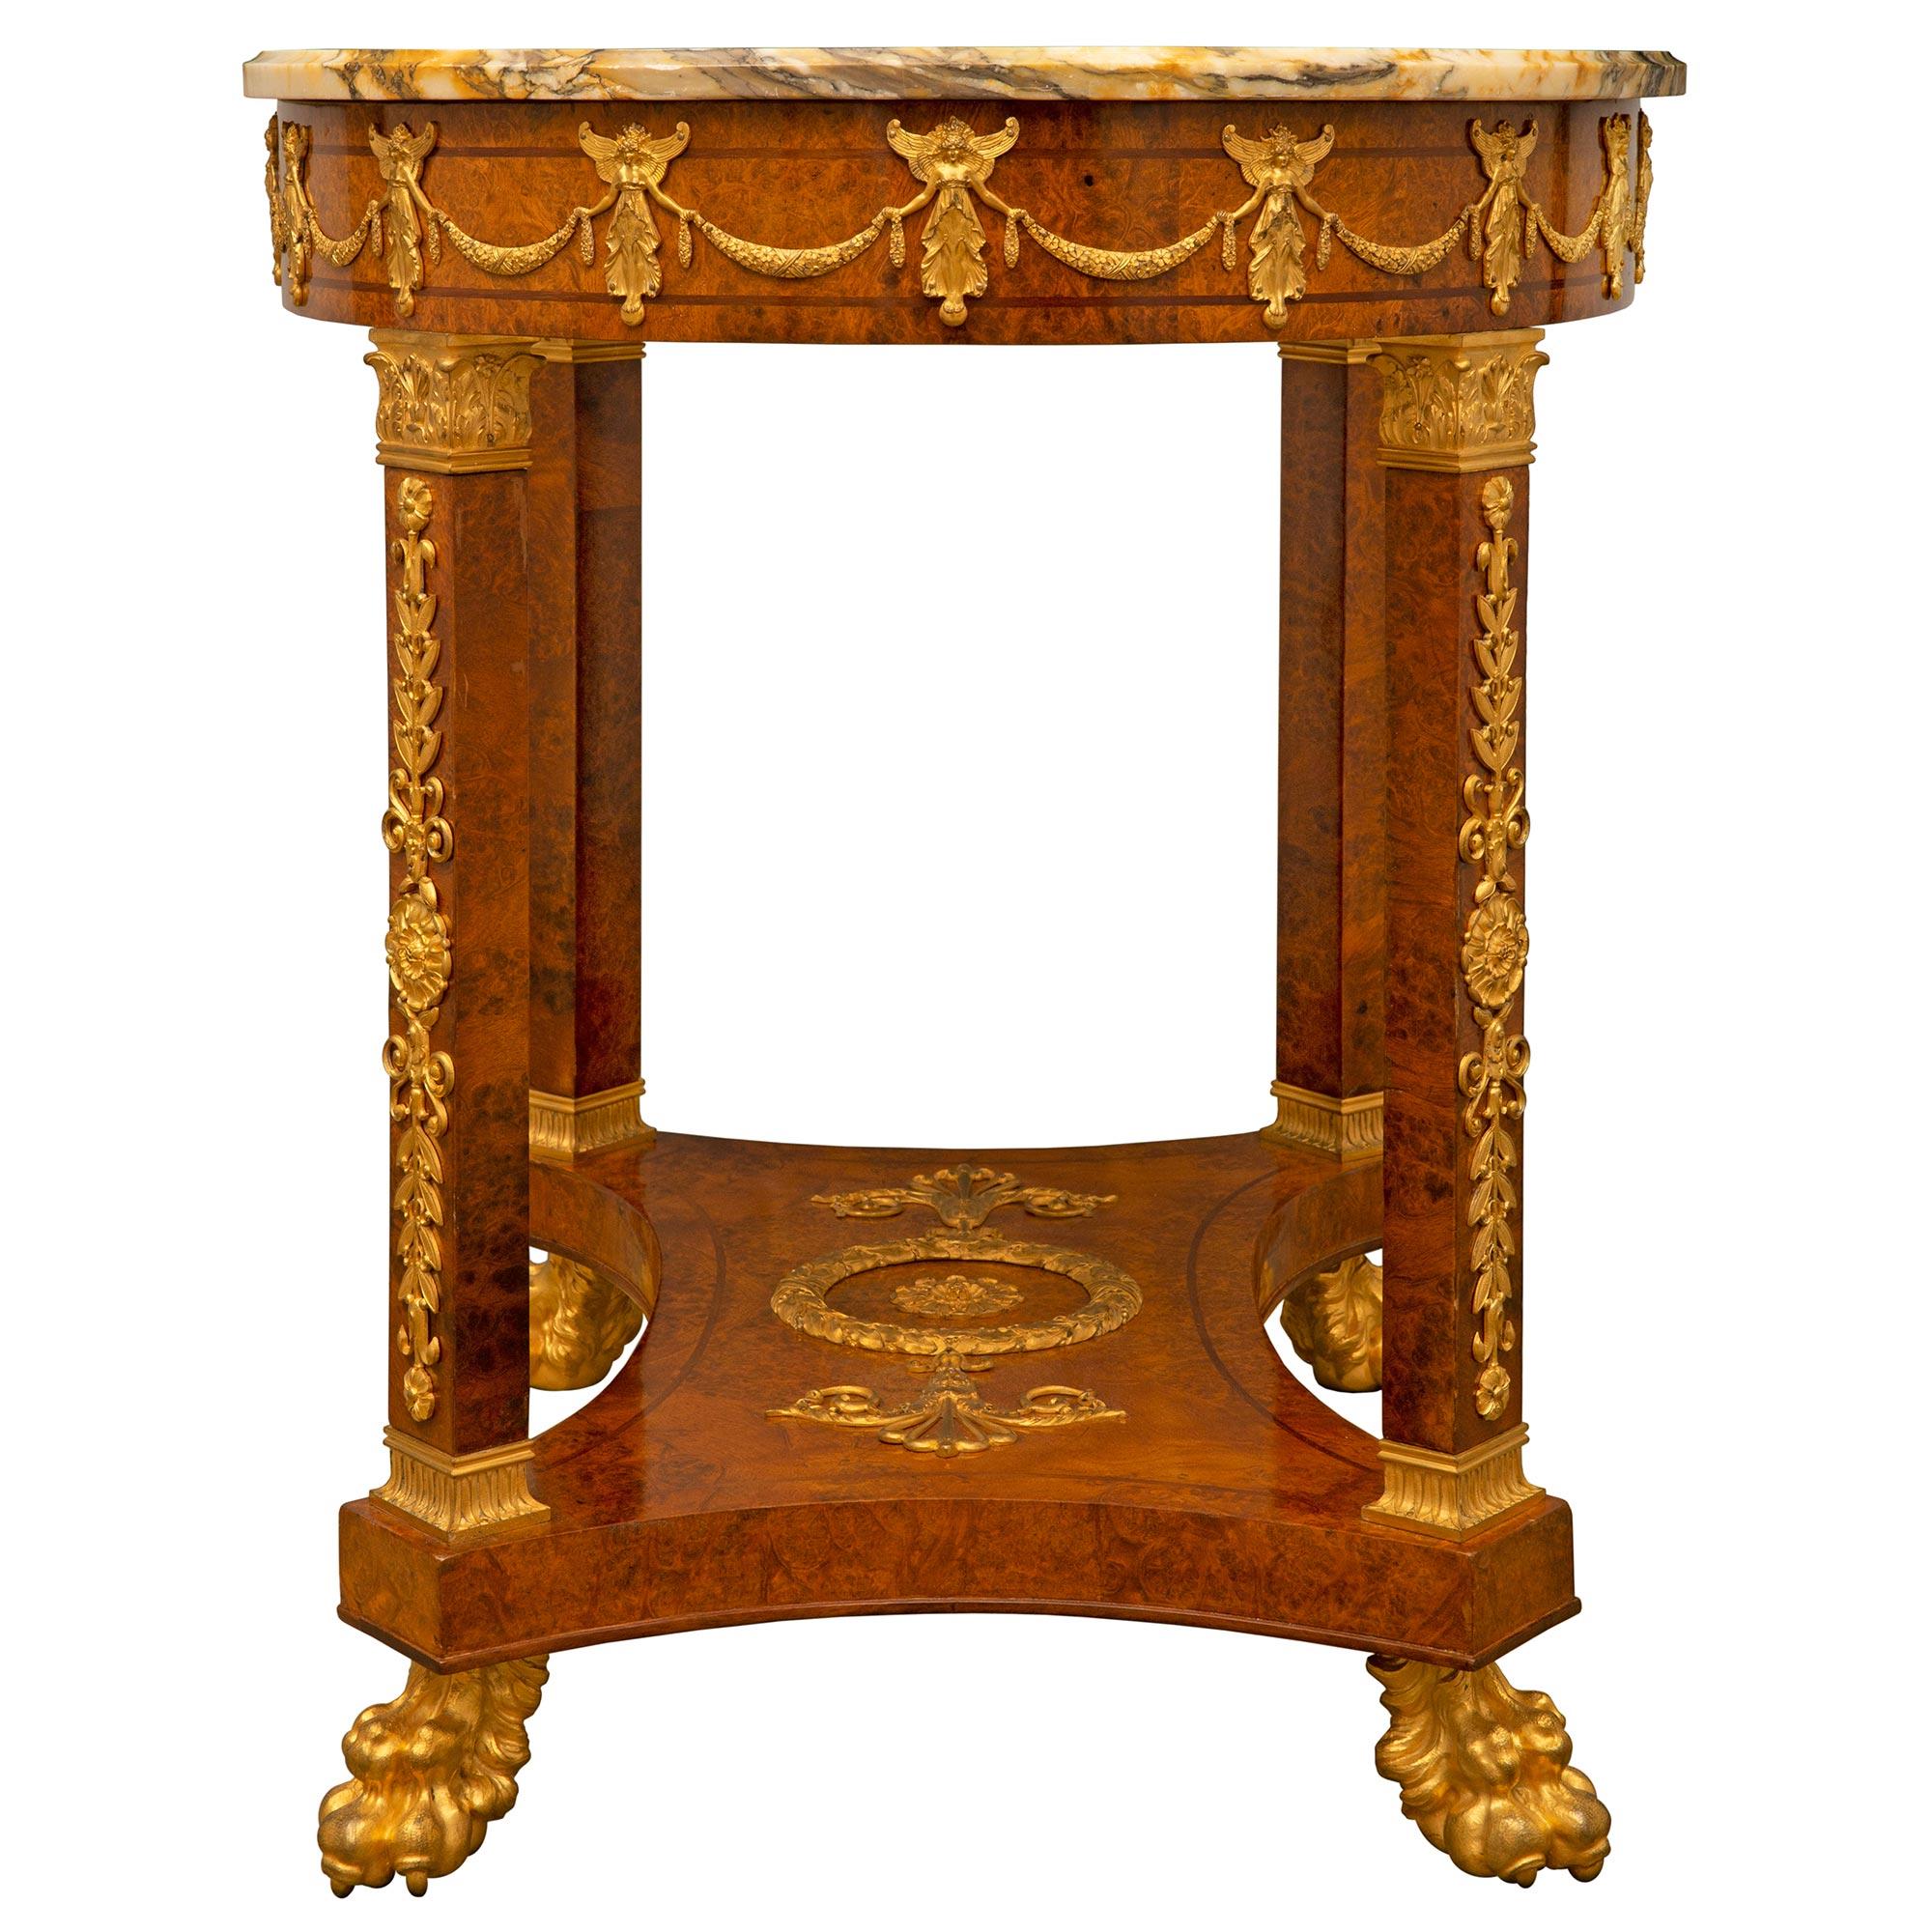 French 19th Century Empire St. Burl Walnut, Ormolu and Marble Side Table In Good Condition For Sale In West Palm Beach, FL